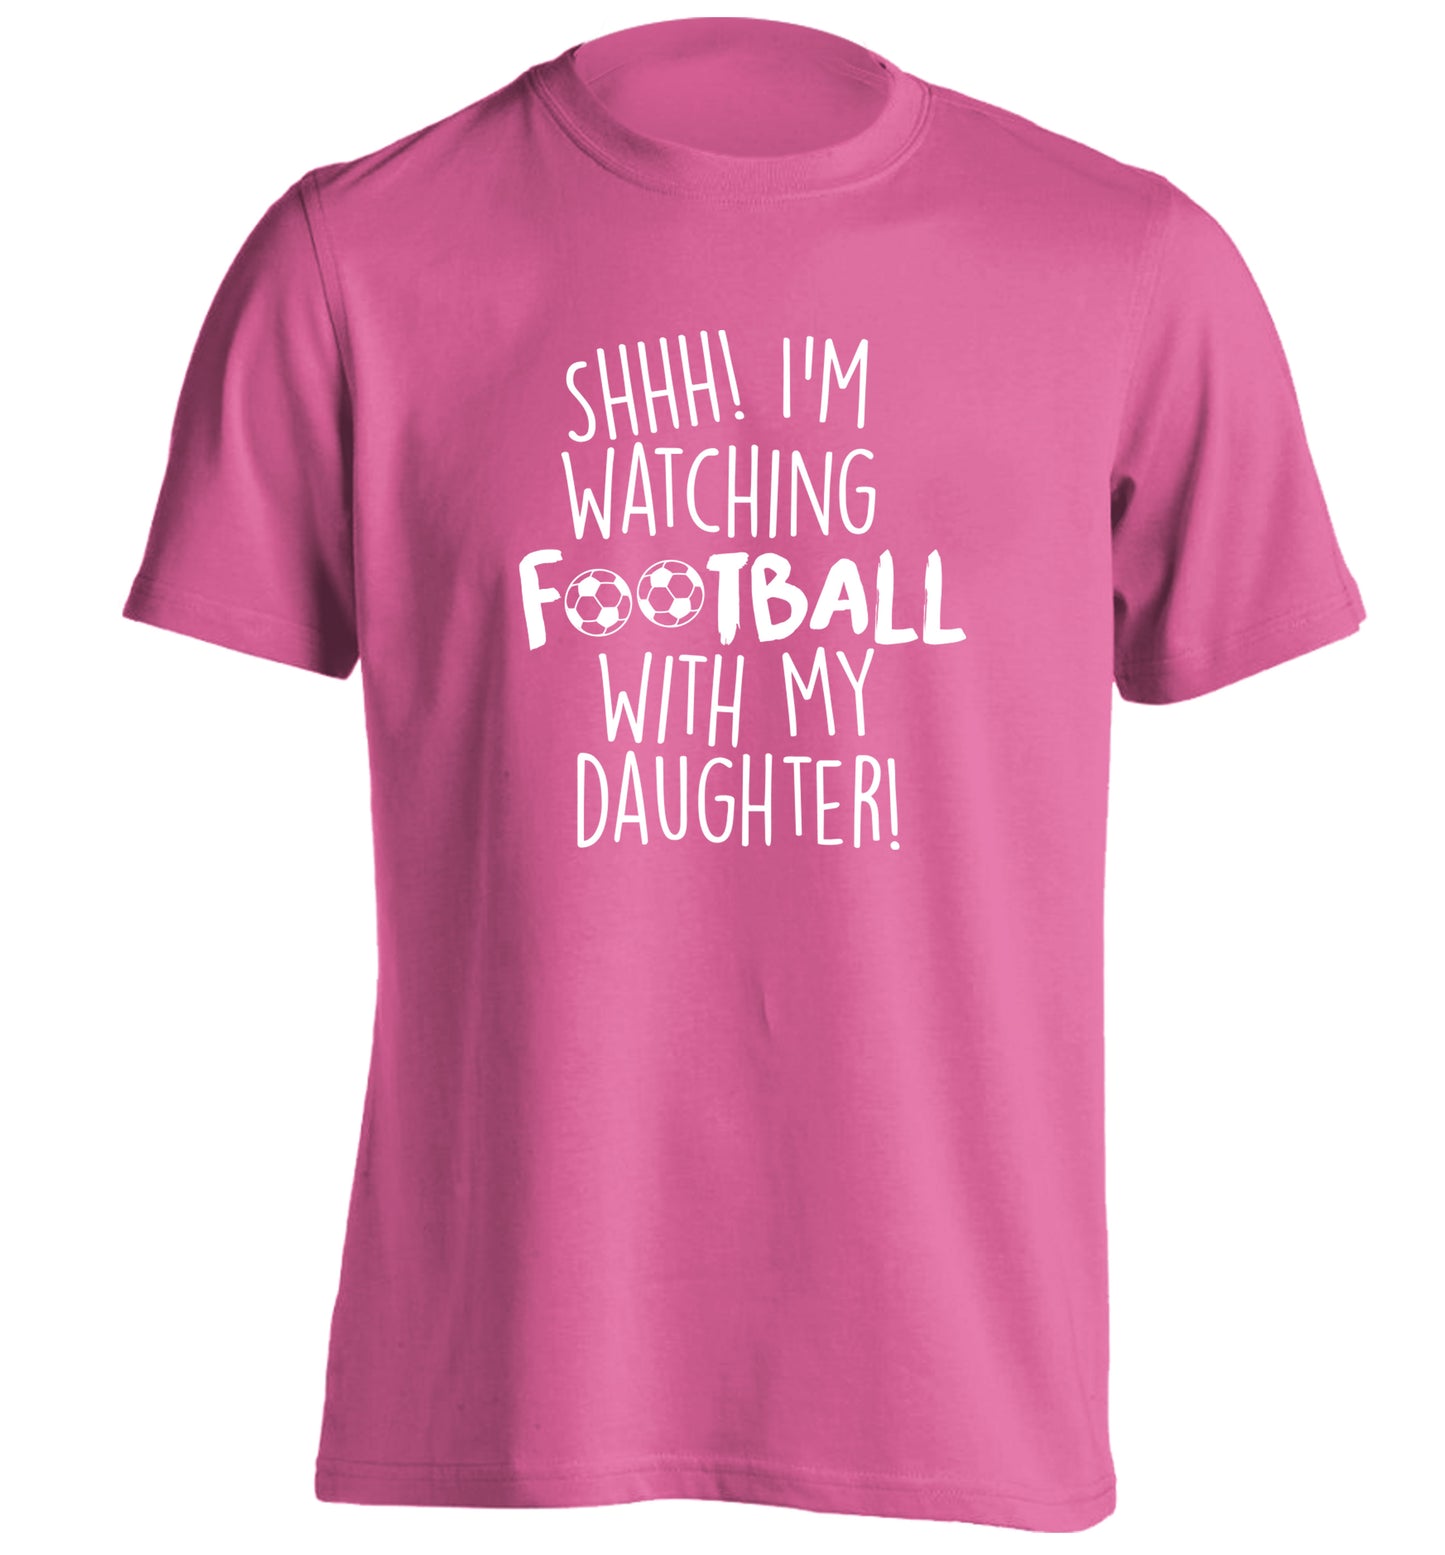 Shhh I'm watching football with my daughter adults unisexpink Tshirt 2XL